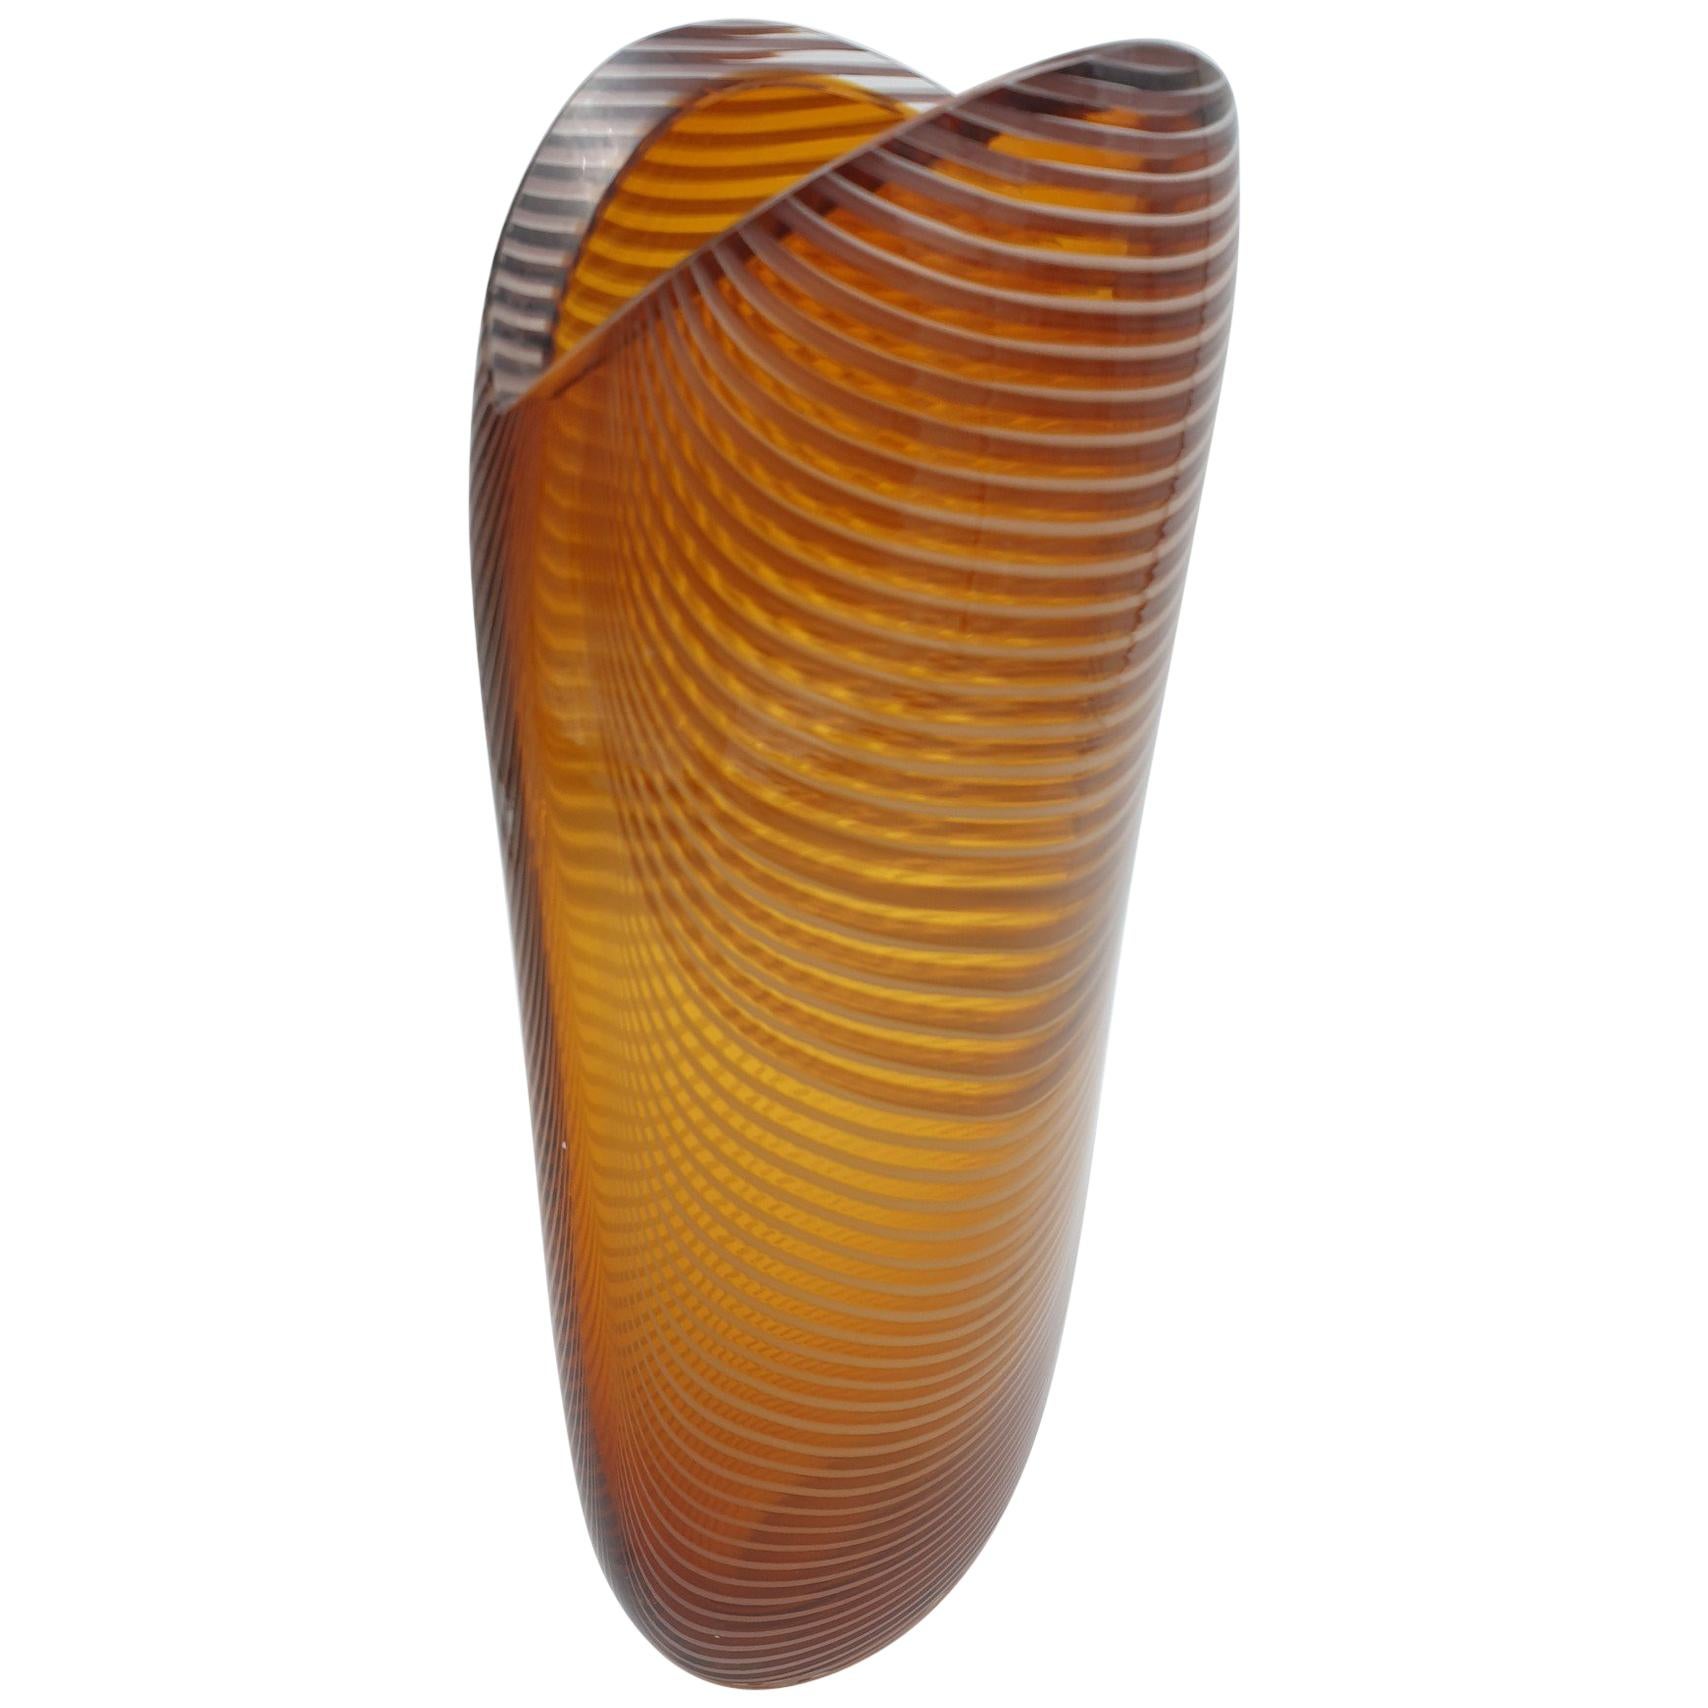 Modern Amber Murano Glass Vase, "Cappe" Collection by Cenedese, Late 1990s For Sale